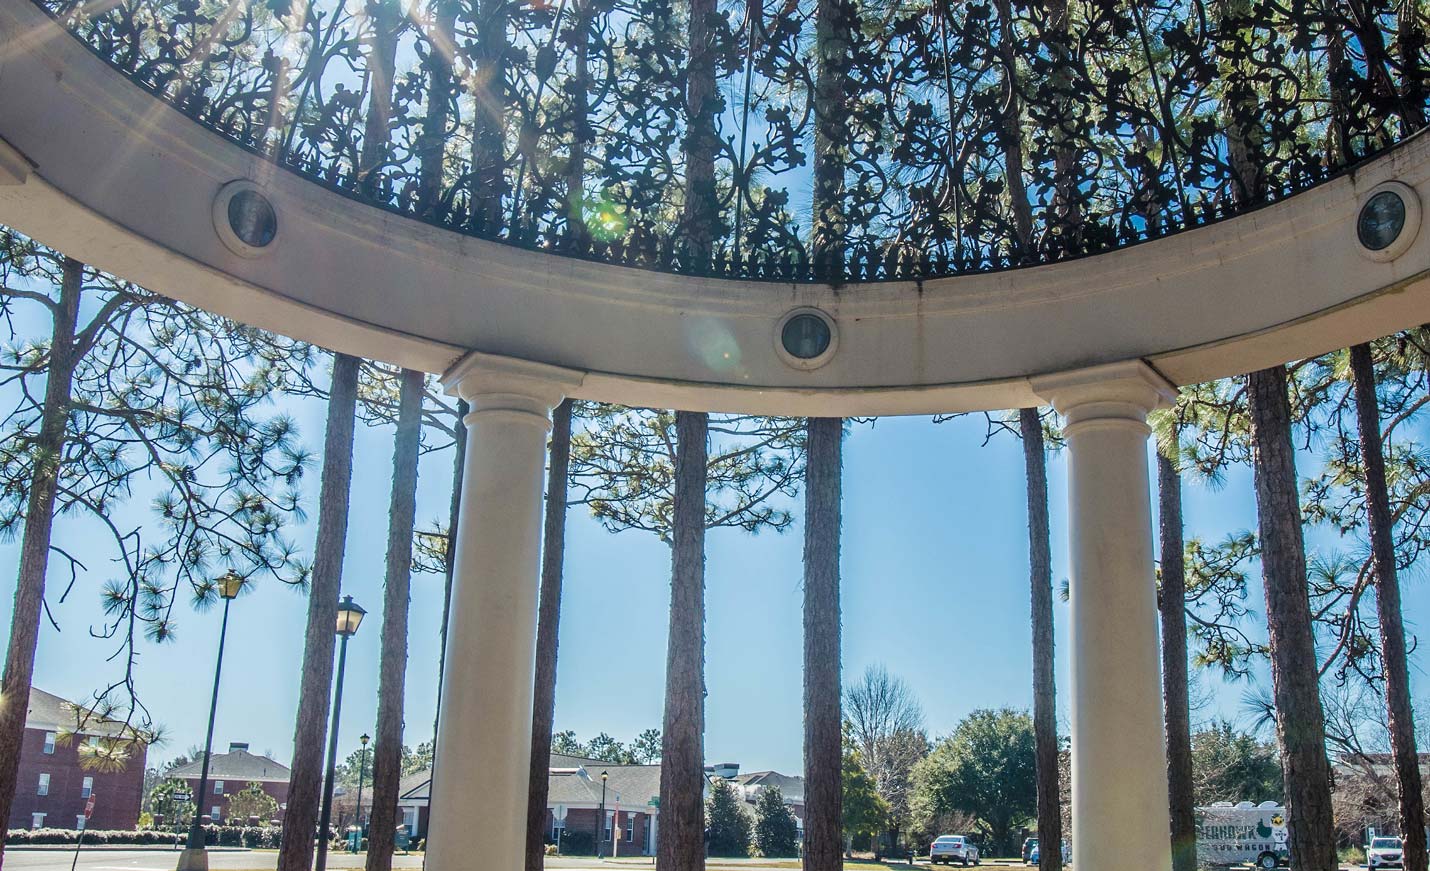 sun shines through the gazebo by the student residence halls